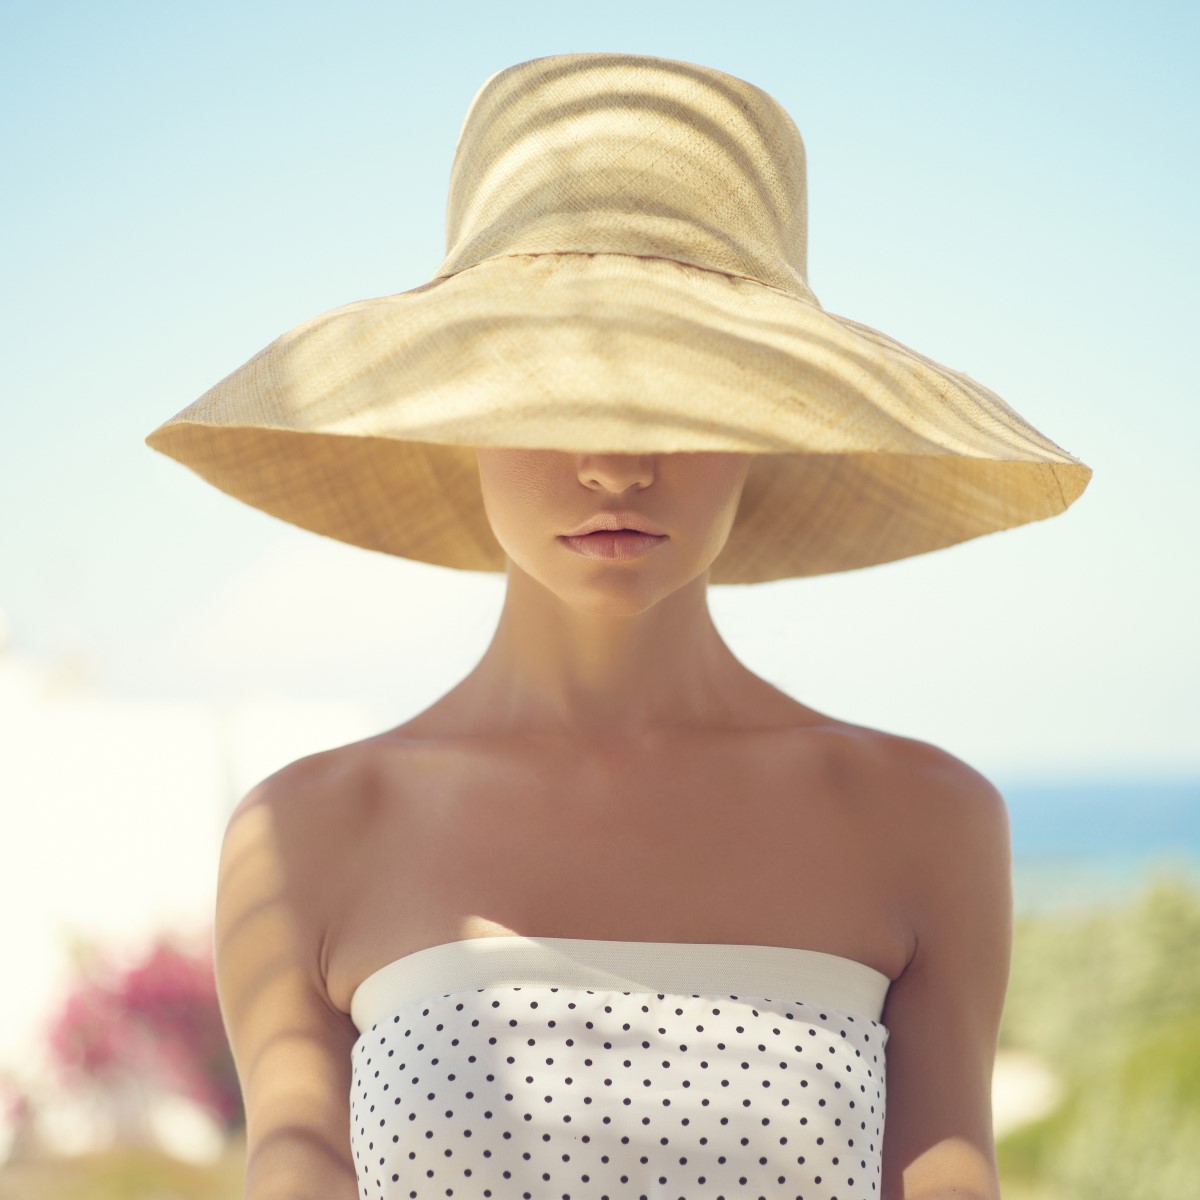 Beautiful young lady in straw hat in the sunlight